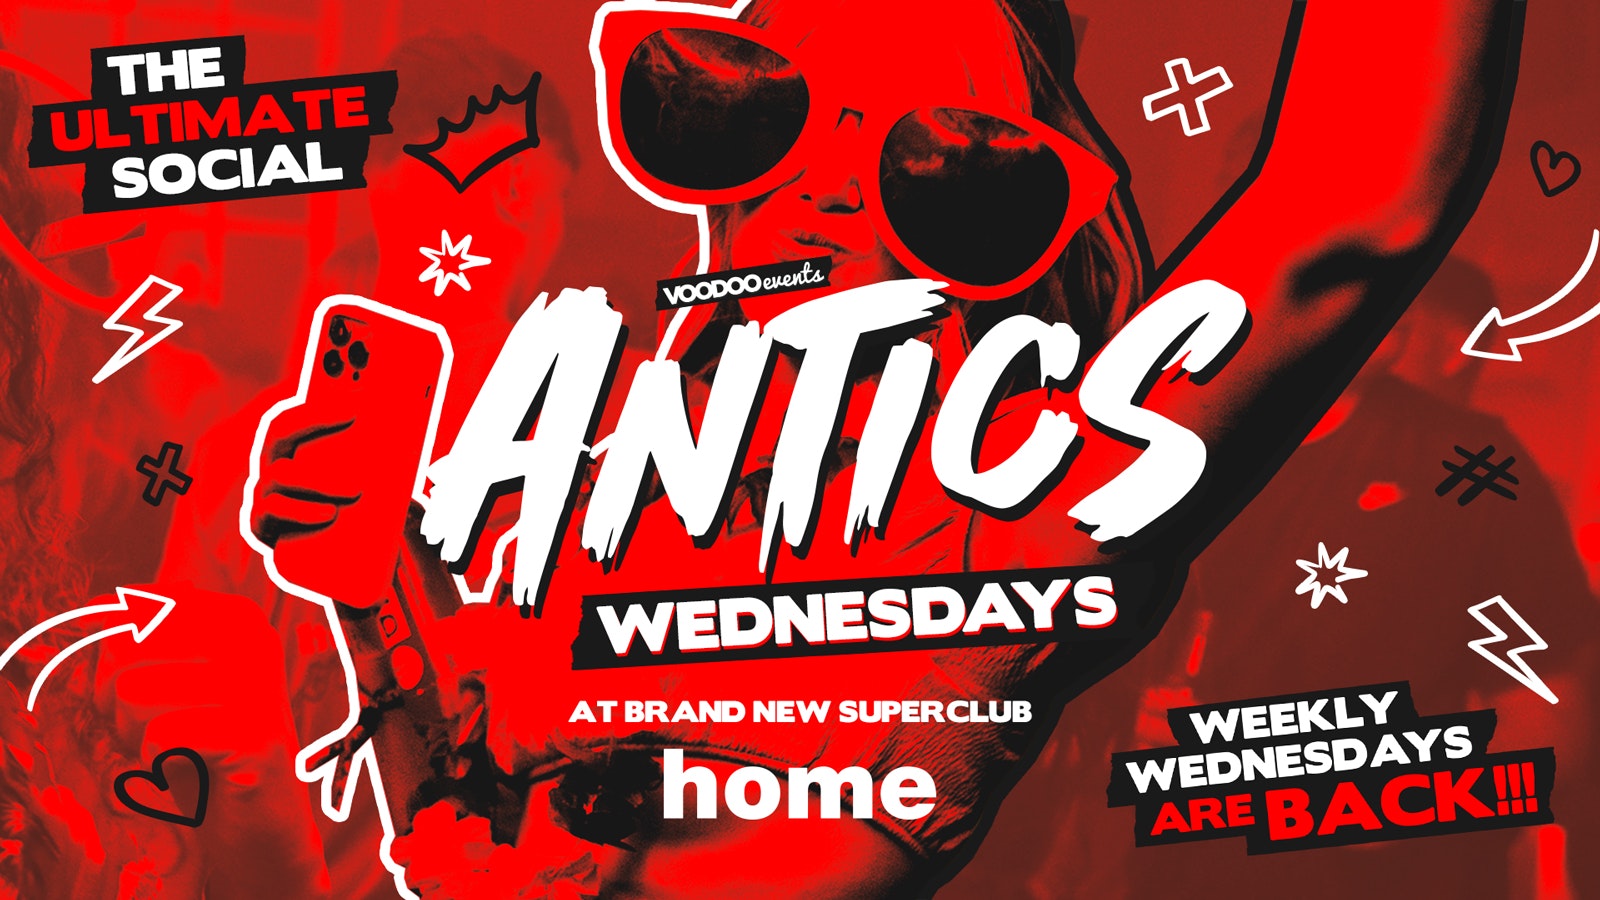 Antics @ THE BRAND NEW SUPER CLUB HOME – Wednesday 28th August